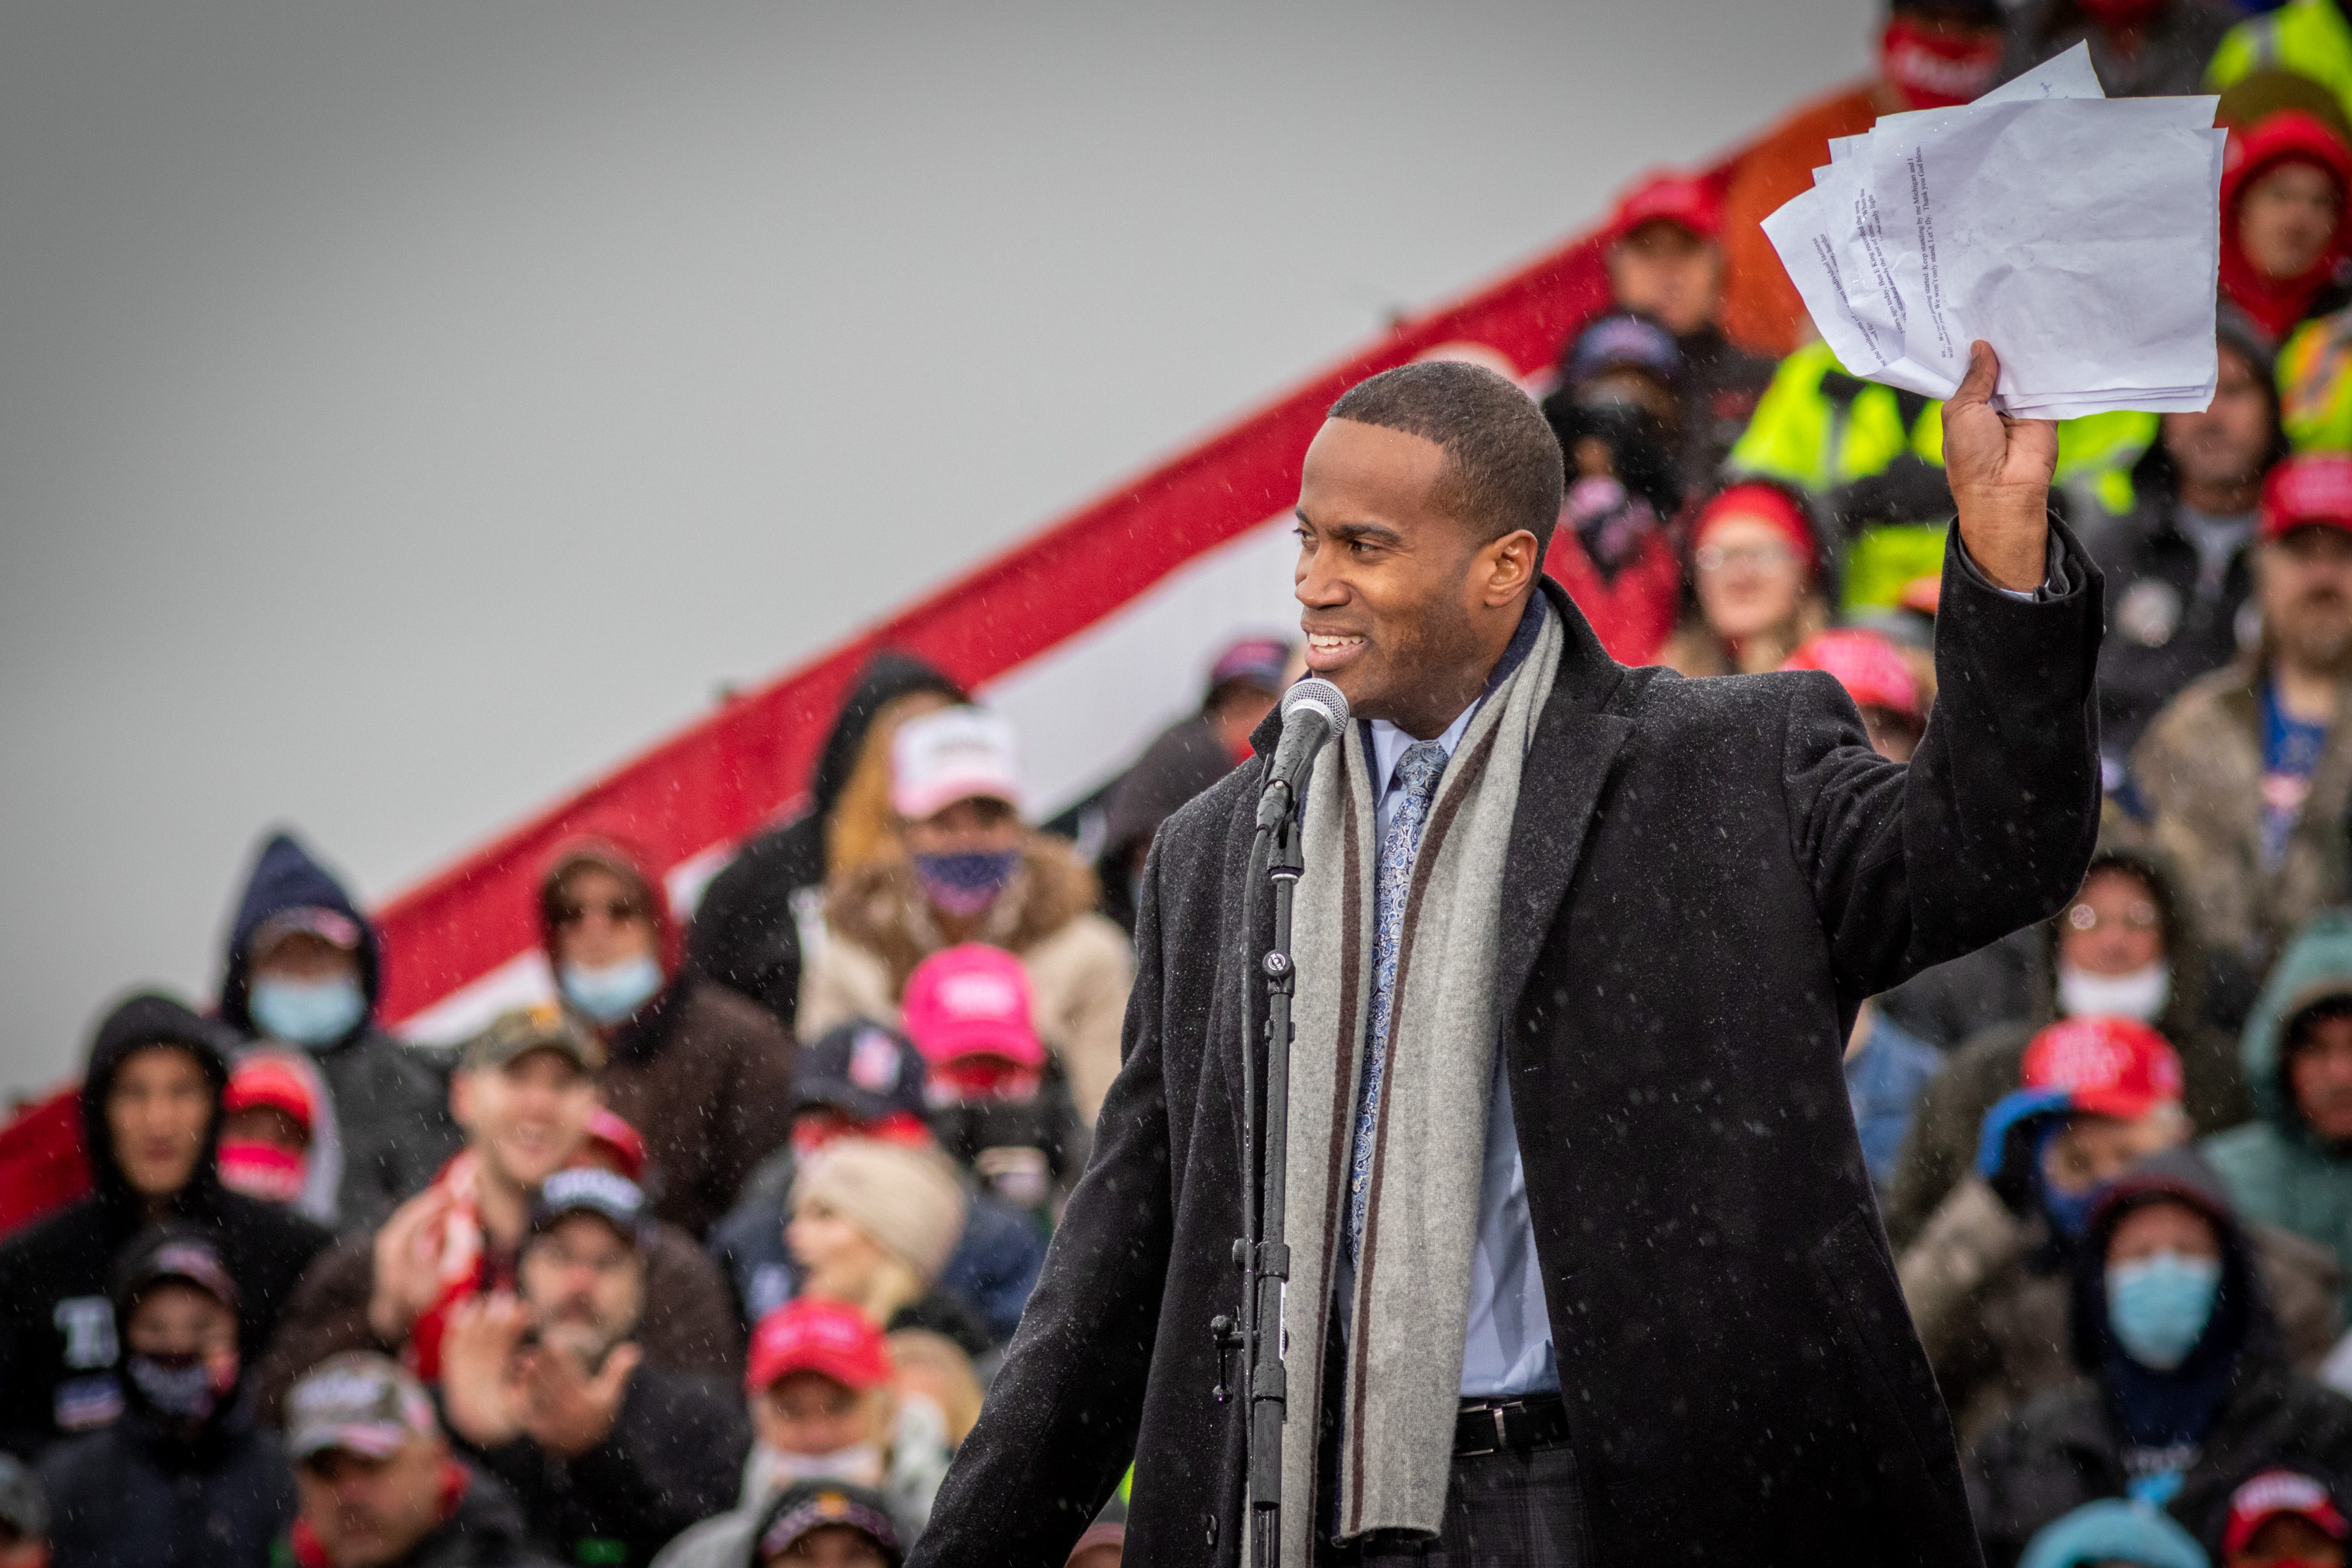 John James addresses the crowd as President Donald Trump holds a rally in Lansing on Oct. 27, 2020.